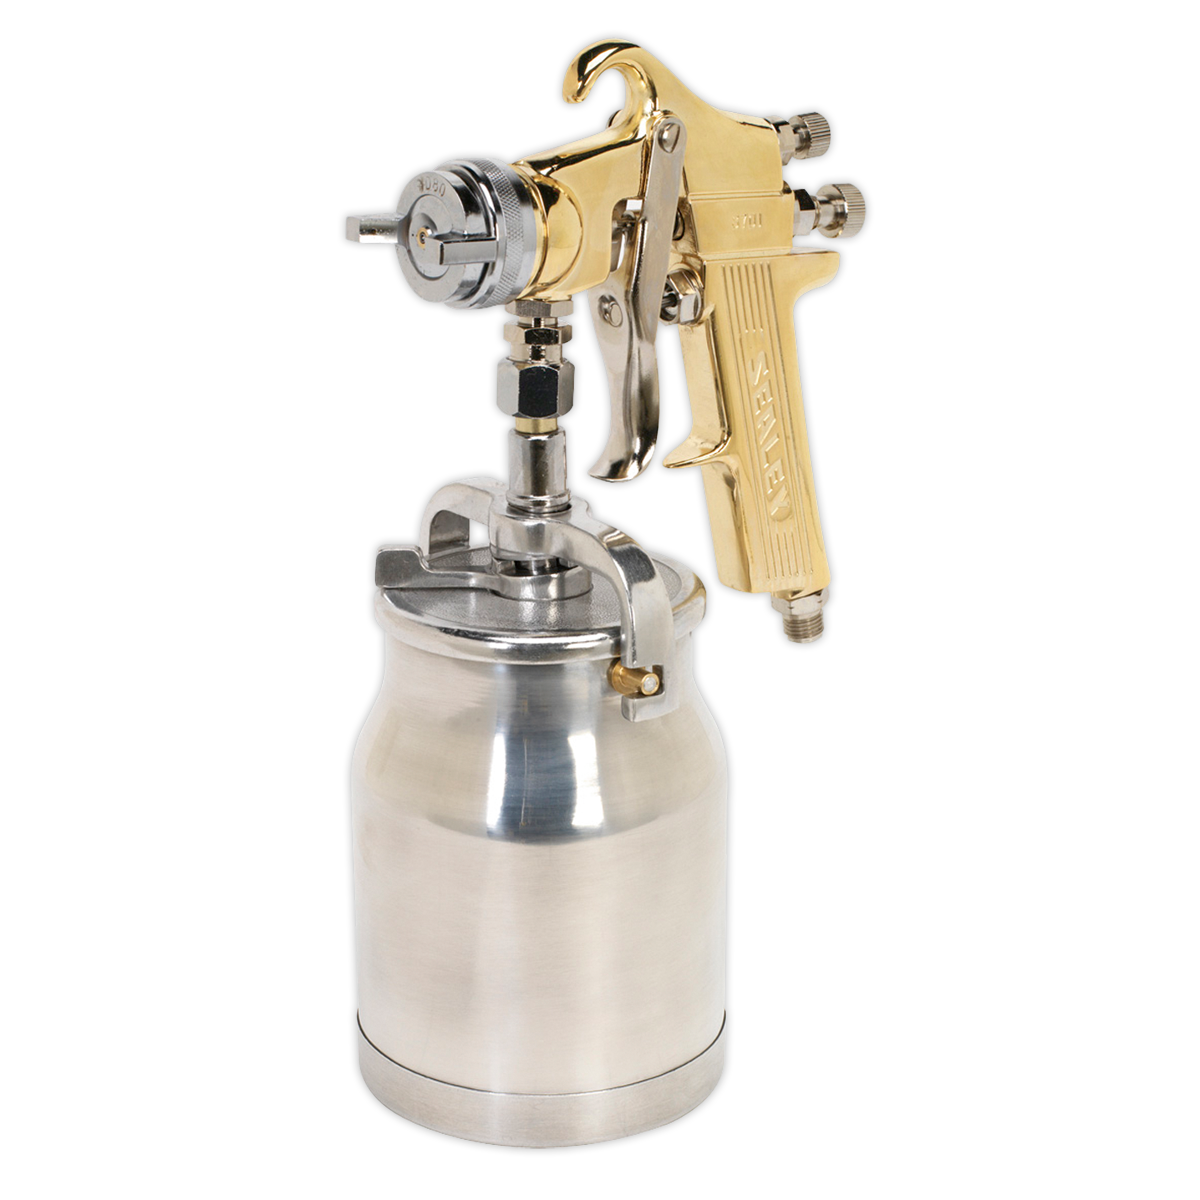 Sealey S701 Spray Gun Professional Suction Feed 1.8mm Set-Up